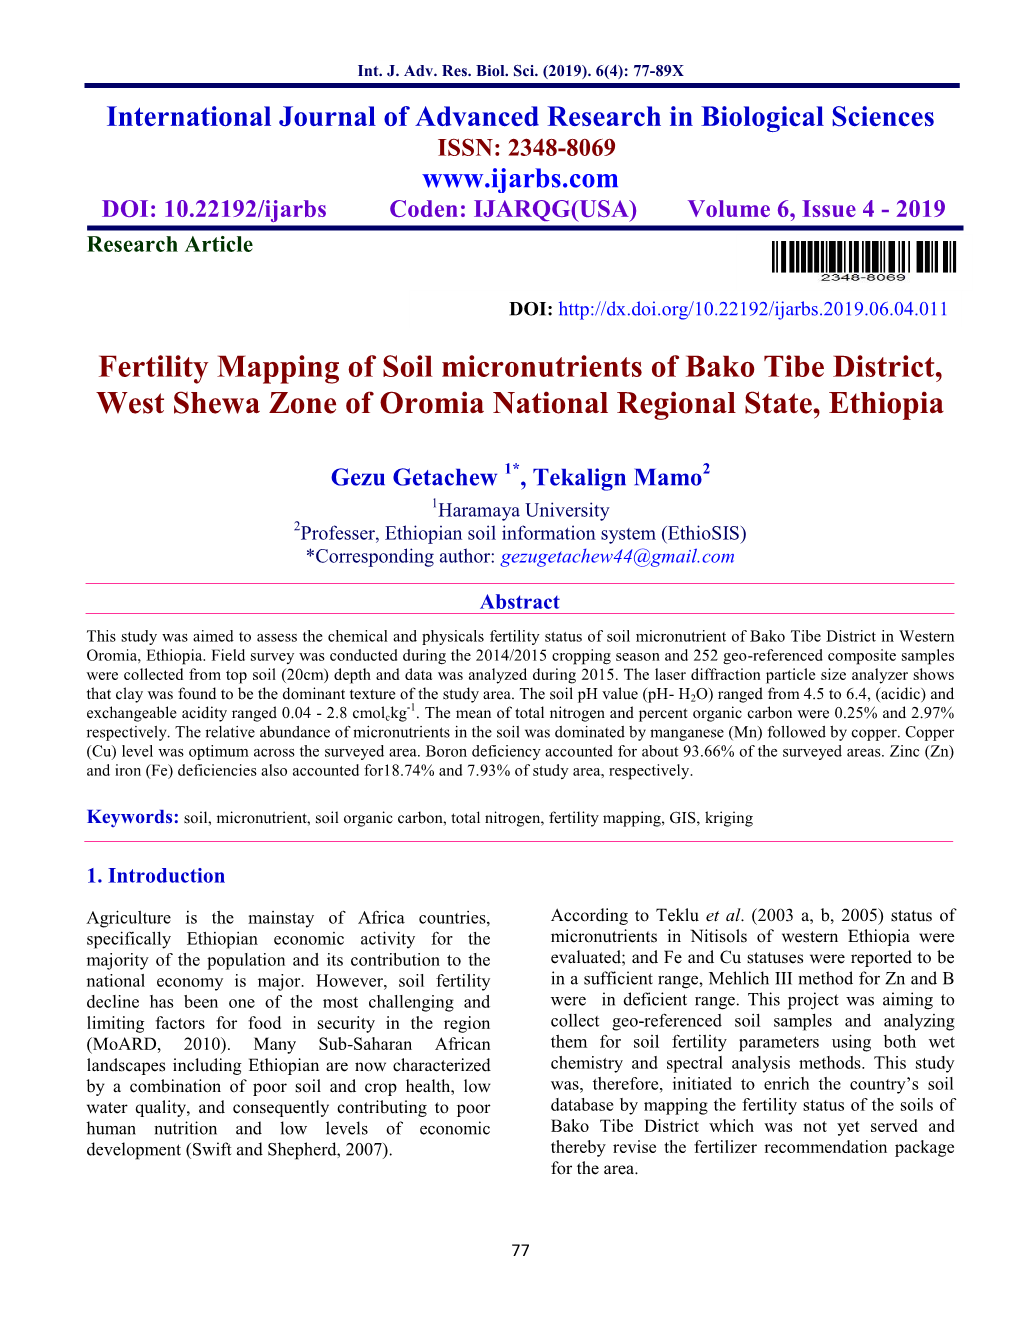 Fertility Mapping of Soil Micronutrients of Bako Tibe District, West Shewa Zone of Oromia National Regional State, Ethiopia